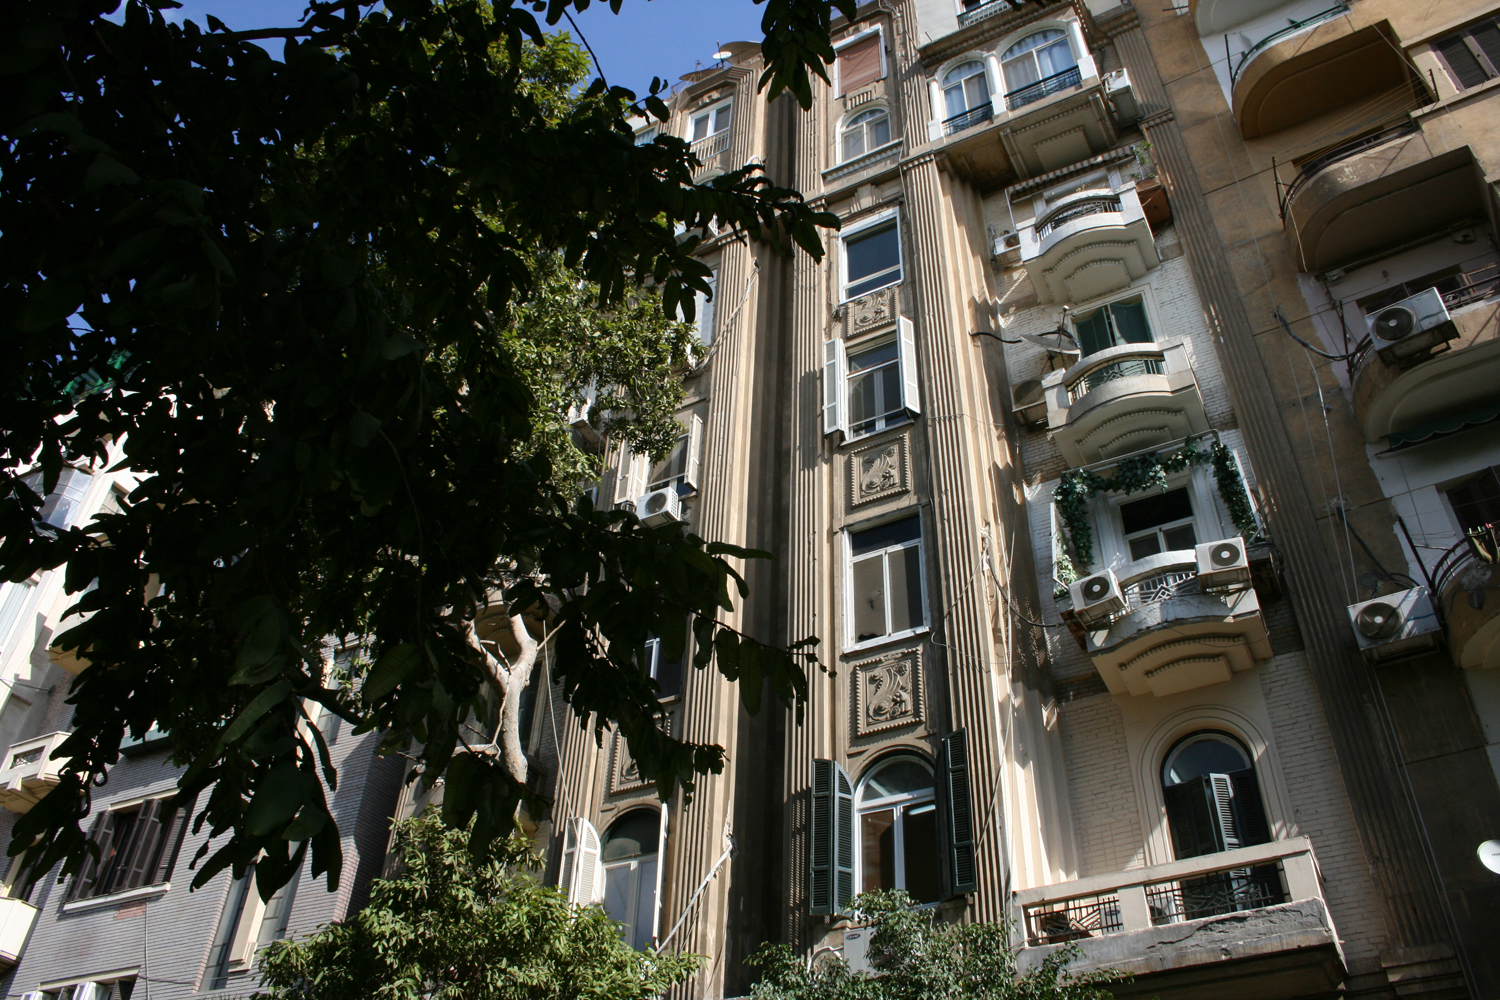 The "avant-corps" are decorated with fluted engaged columns and stylised flowers in stucco